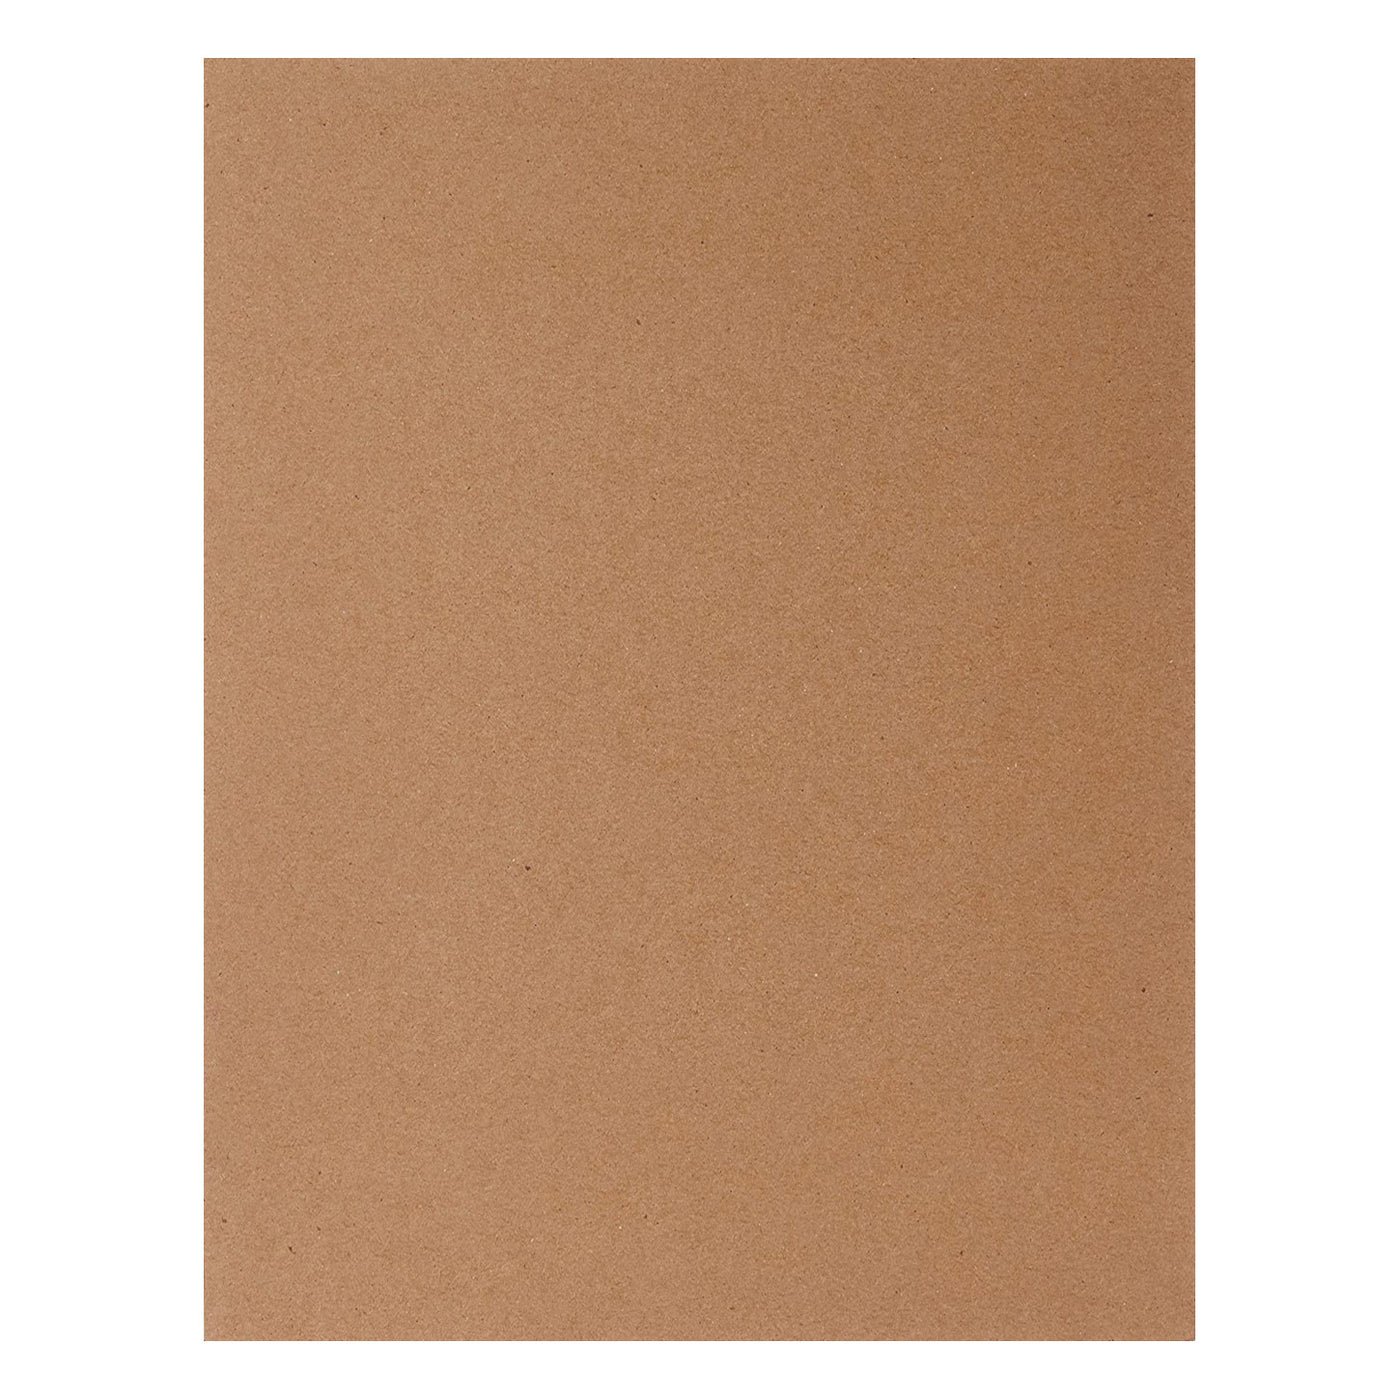 8.5x11 Natural Chipboard from Grafix